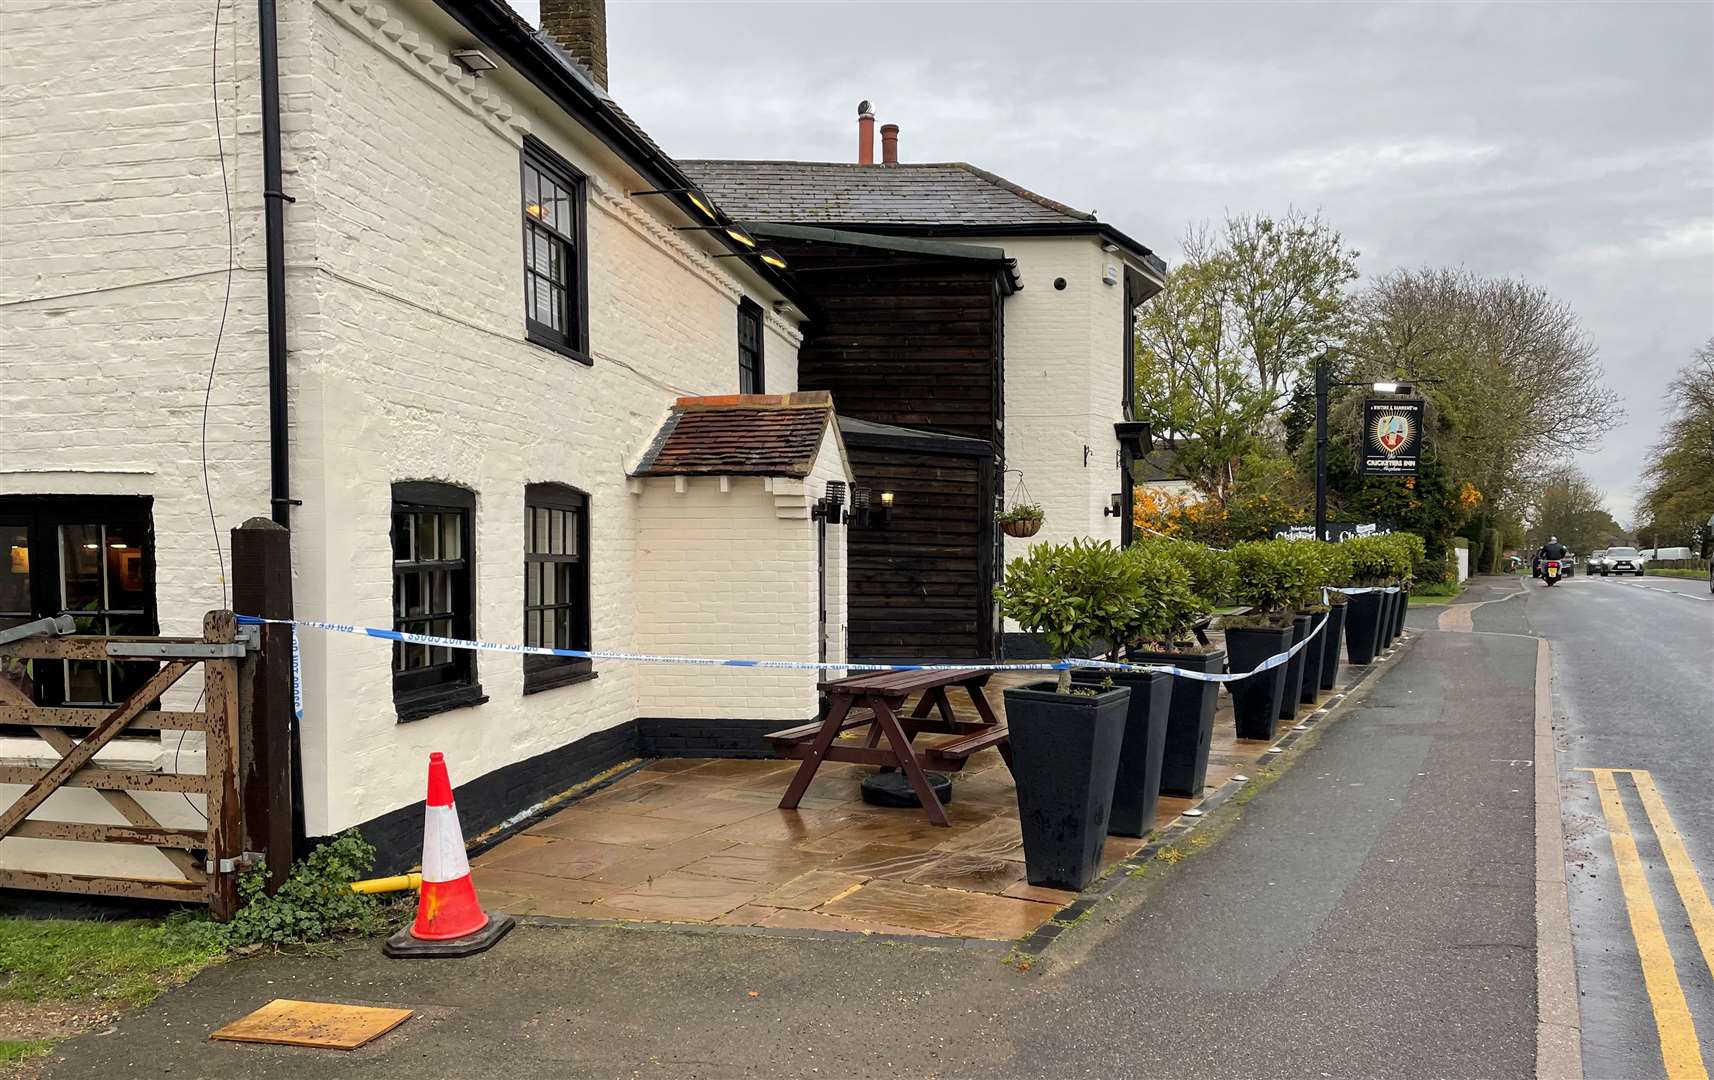 Police at the Cricketers Inn pub in Meopham where Craig Allen was killed.Miguel Batista, known as Alex Batista, is on trial accused of trying to murder pub landlord David Brown